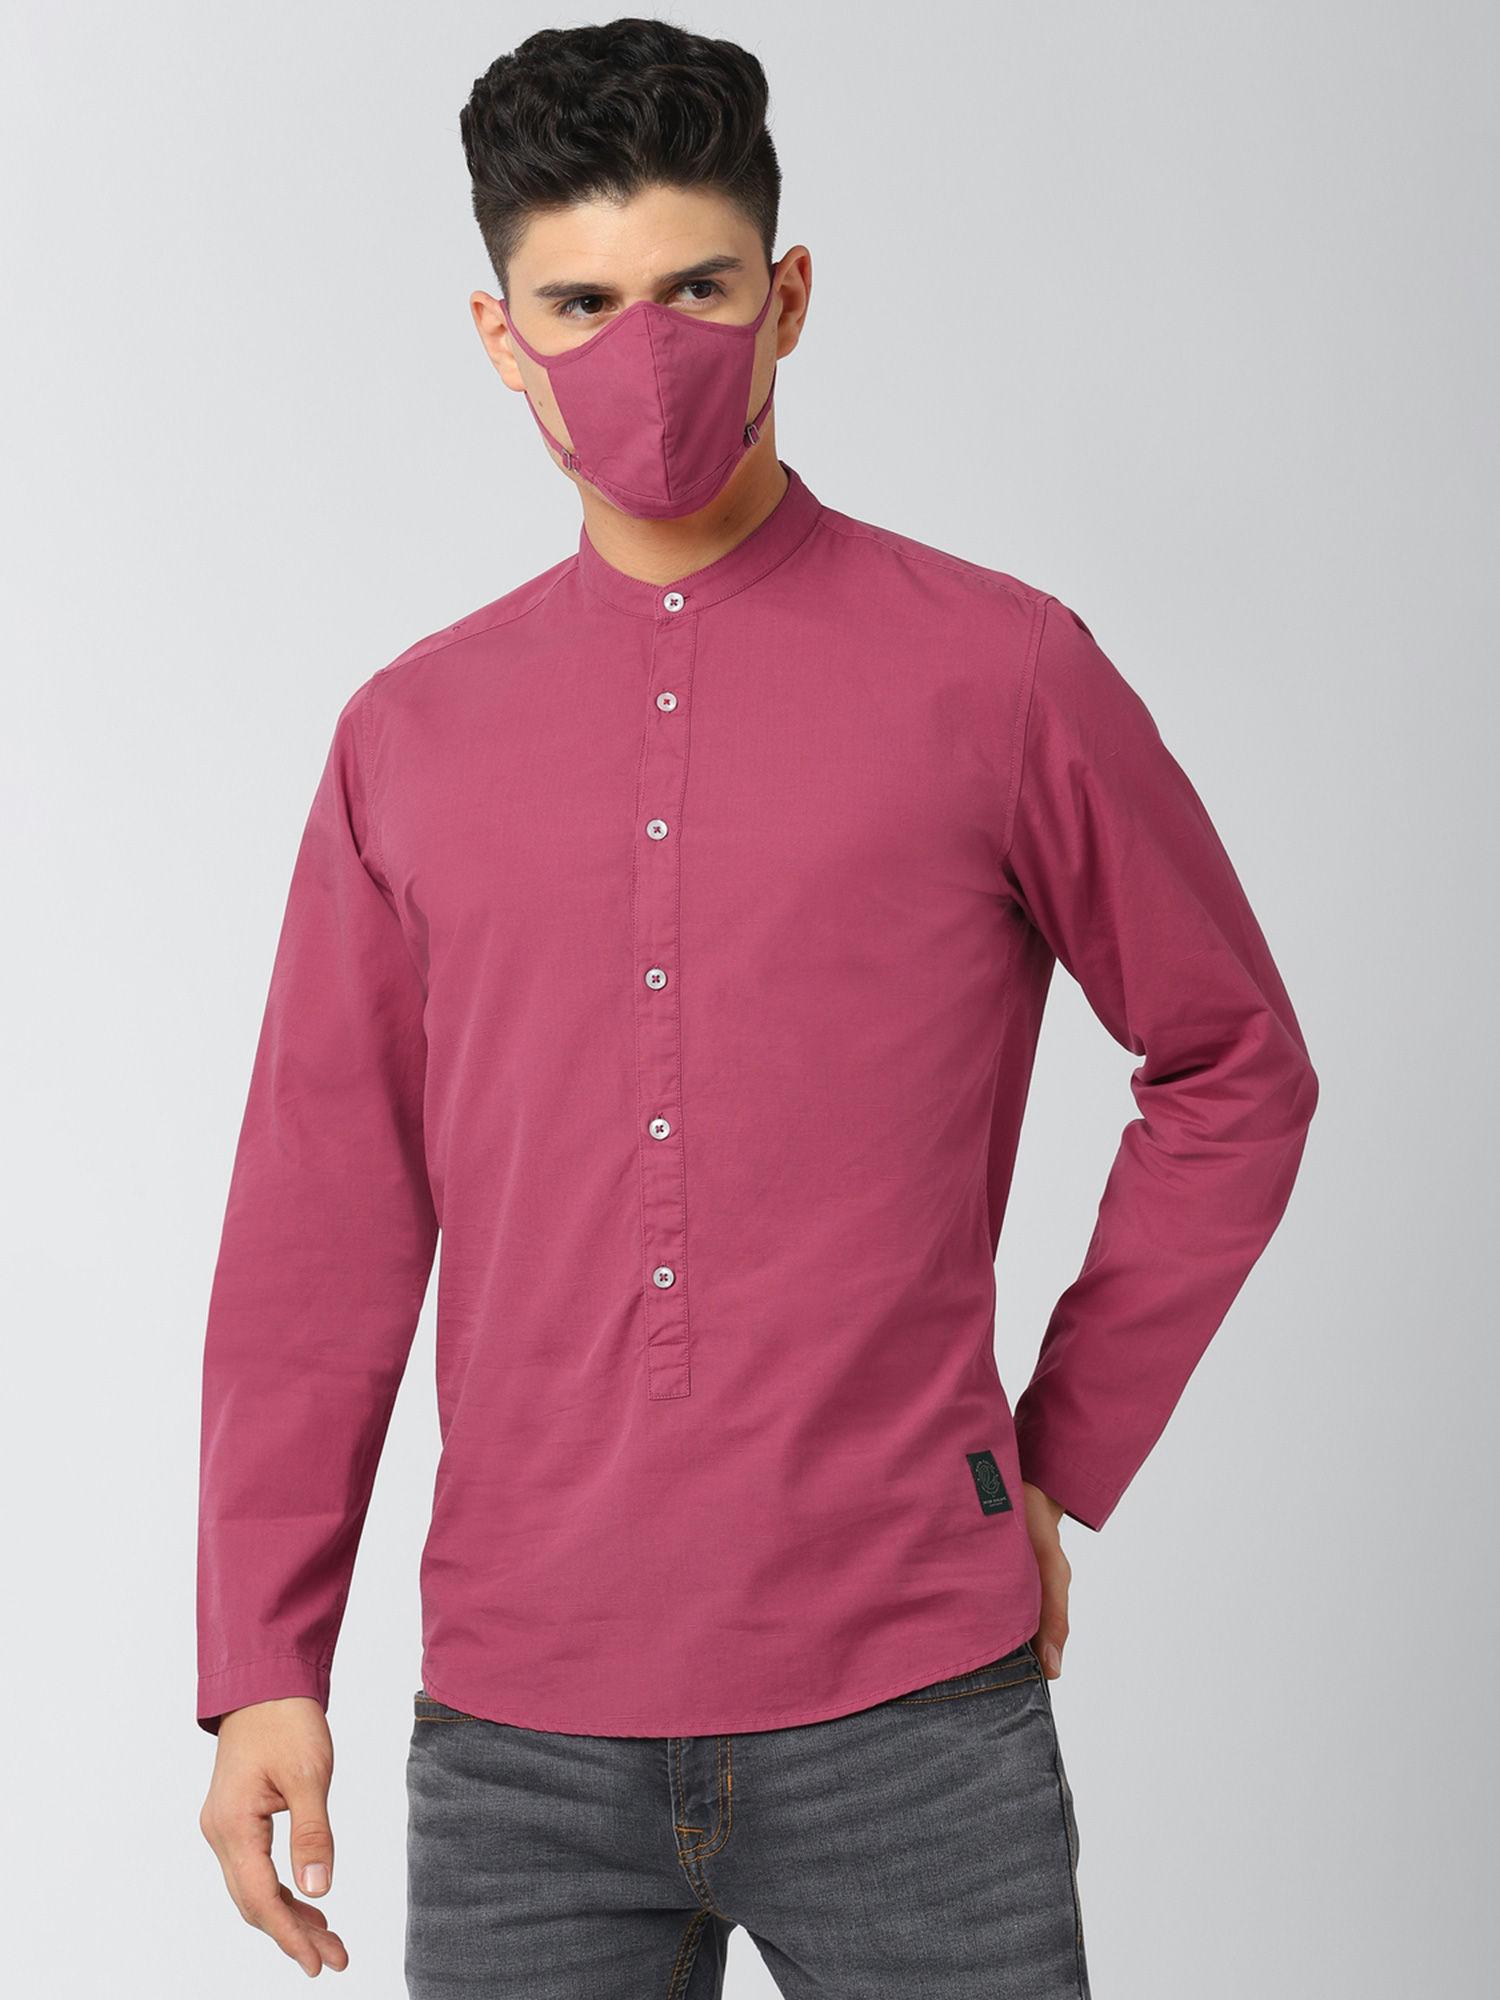 peter england pink full sleeves casual shirt